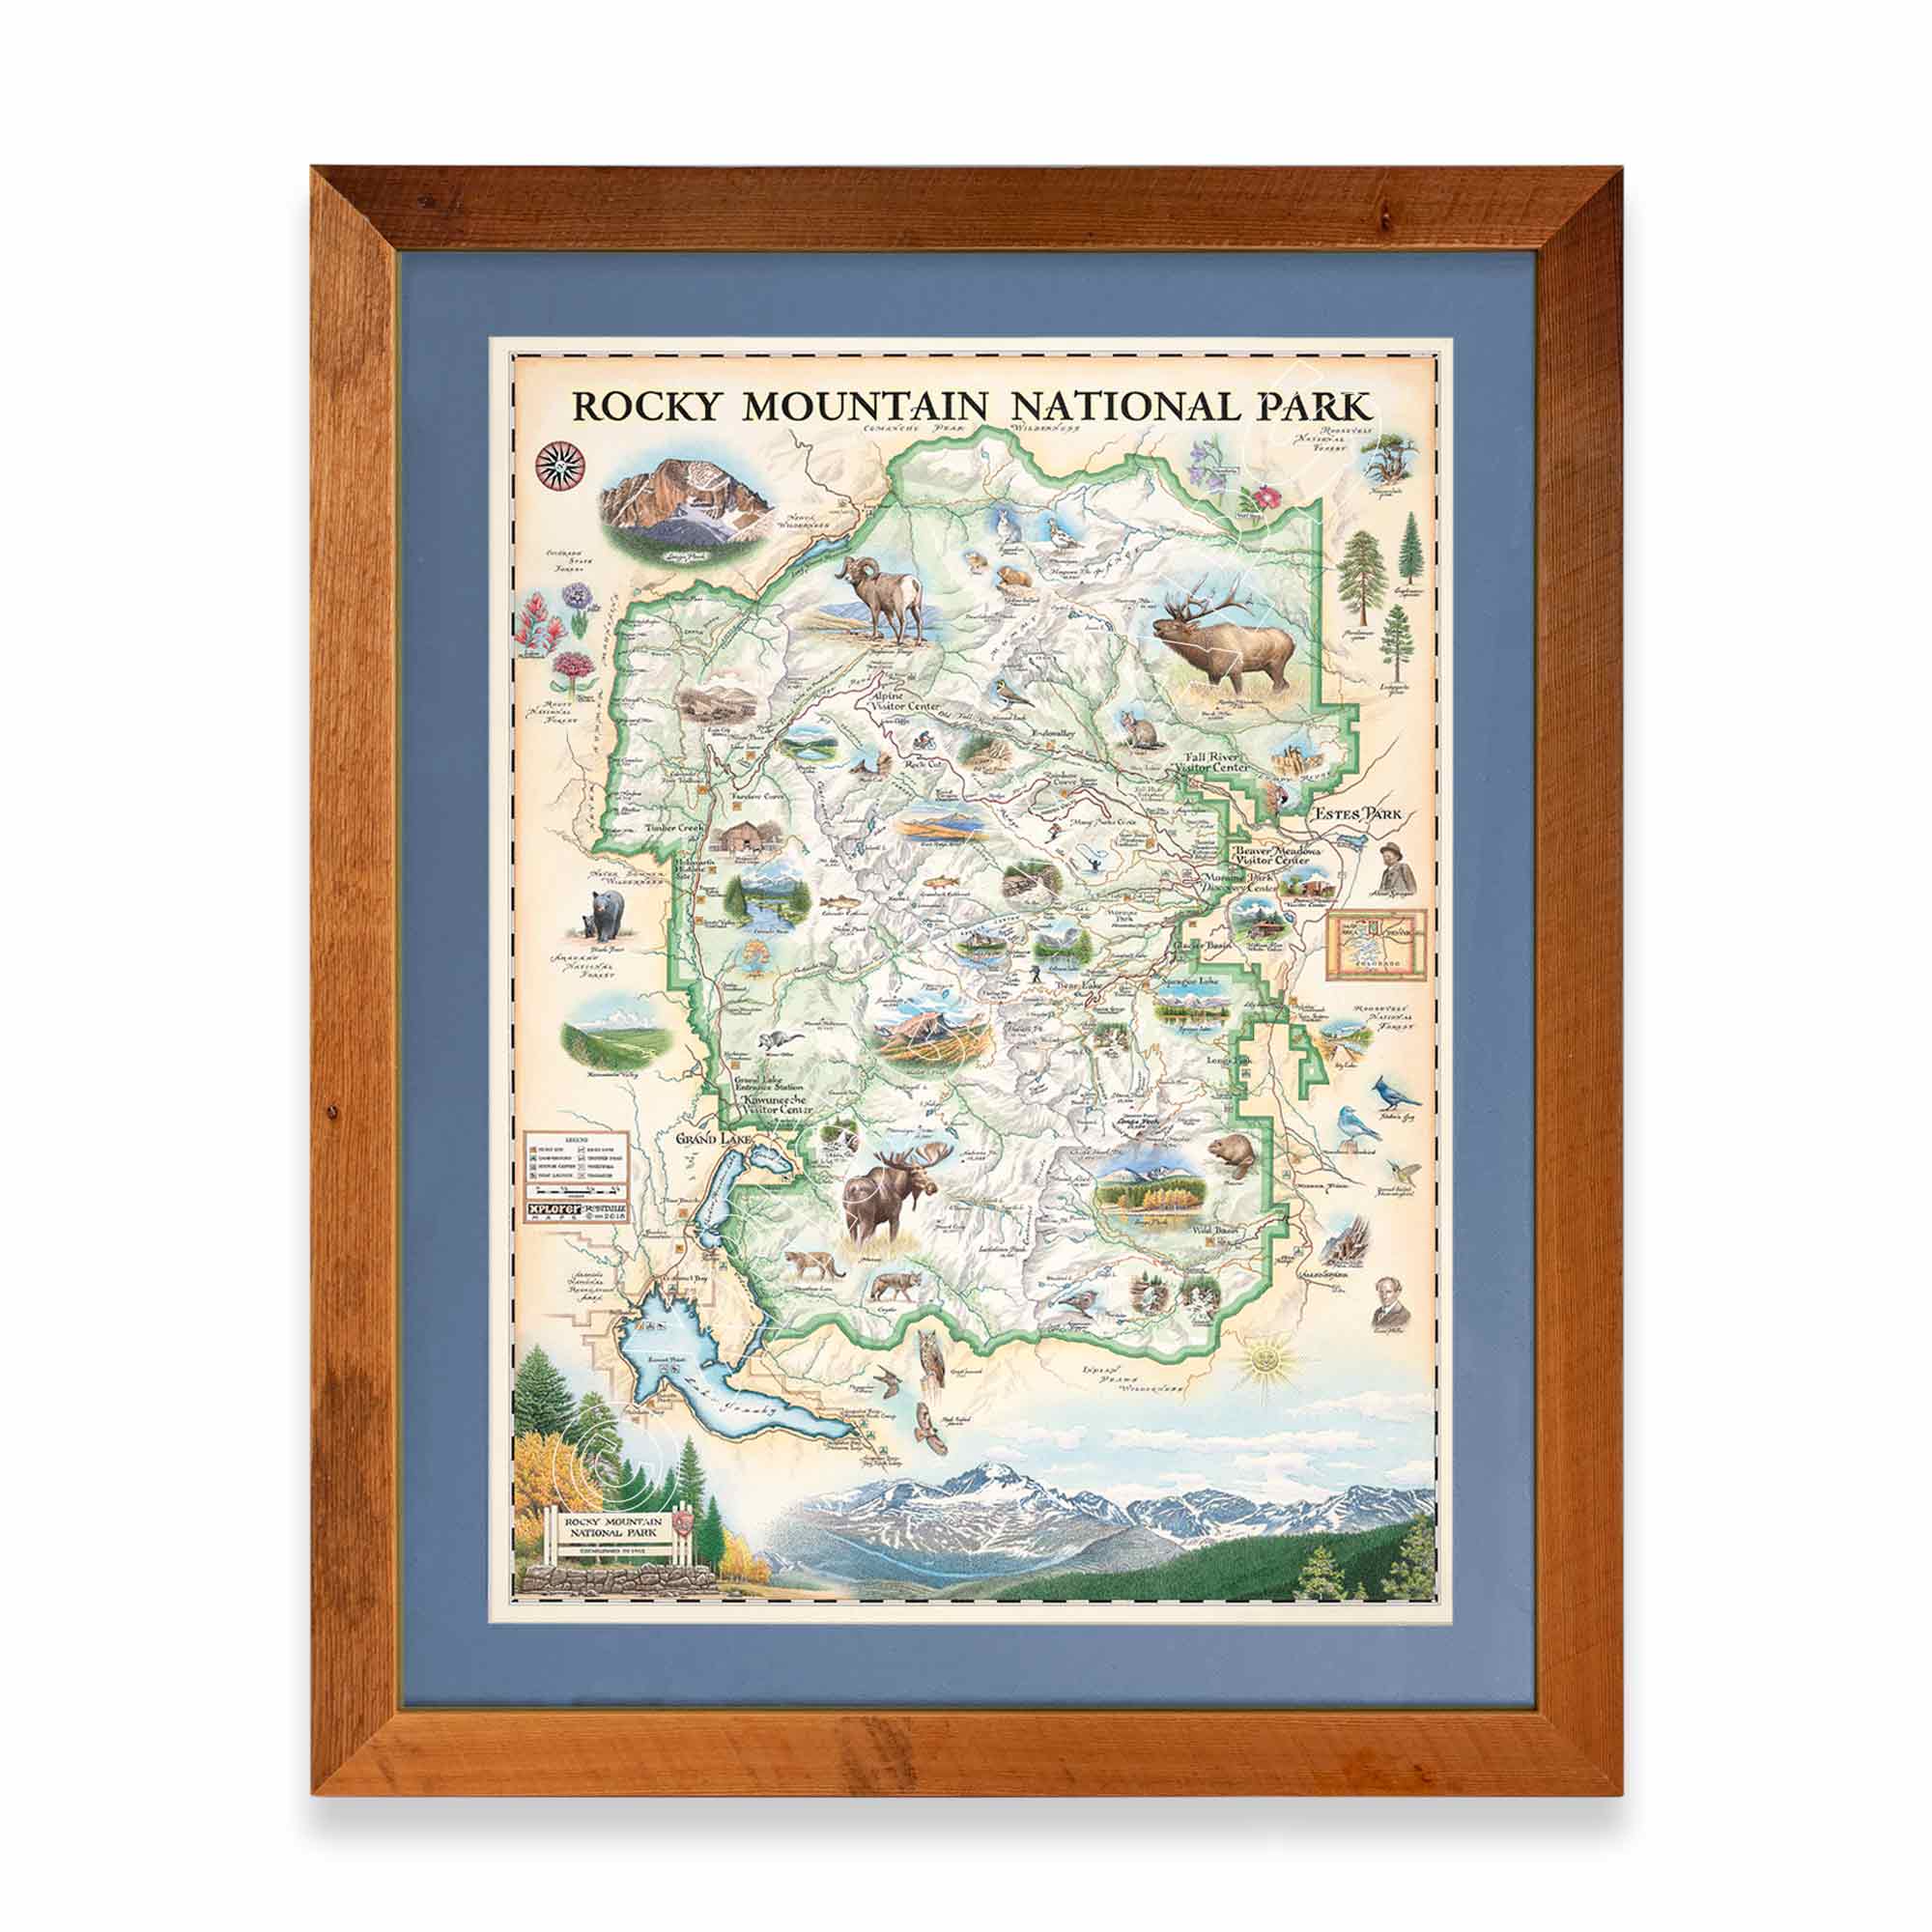 Hand-drawn map of Rocky Mountain National Park in a larch frame with blue mat, showcasing earth tones of green and beige. Illustrations feature landmarks such as Trail Ridge Road, Mount Ganby, Estes Park, and Alpine Visitor Center, alongside flora and fauna like bobcat, snowshoe hare, Indian paintbrush, and wild rose. Dimensions: 18x24 inches.